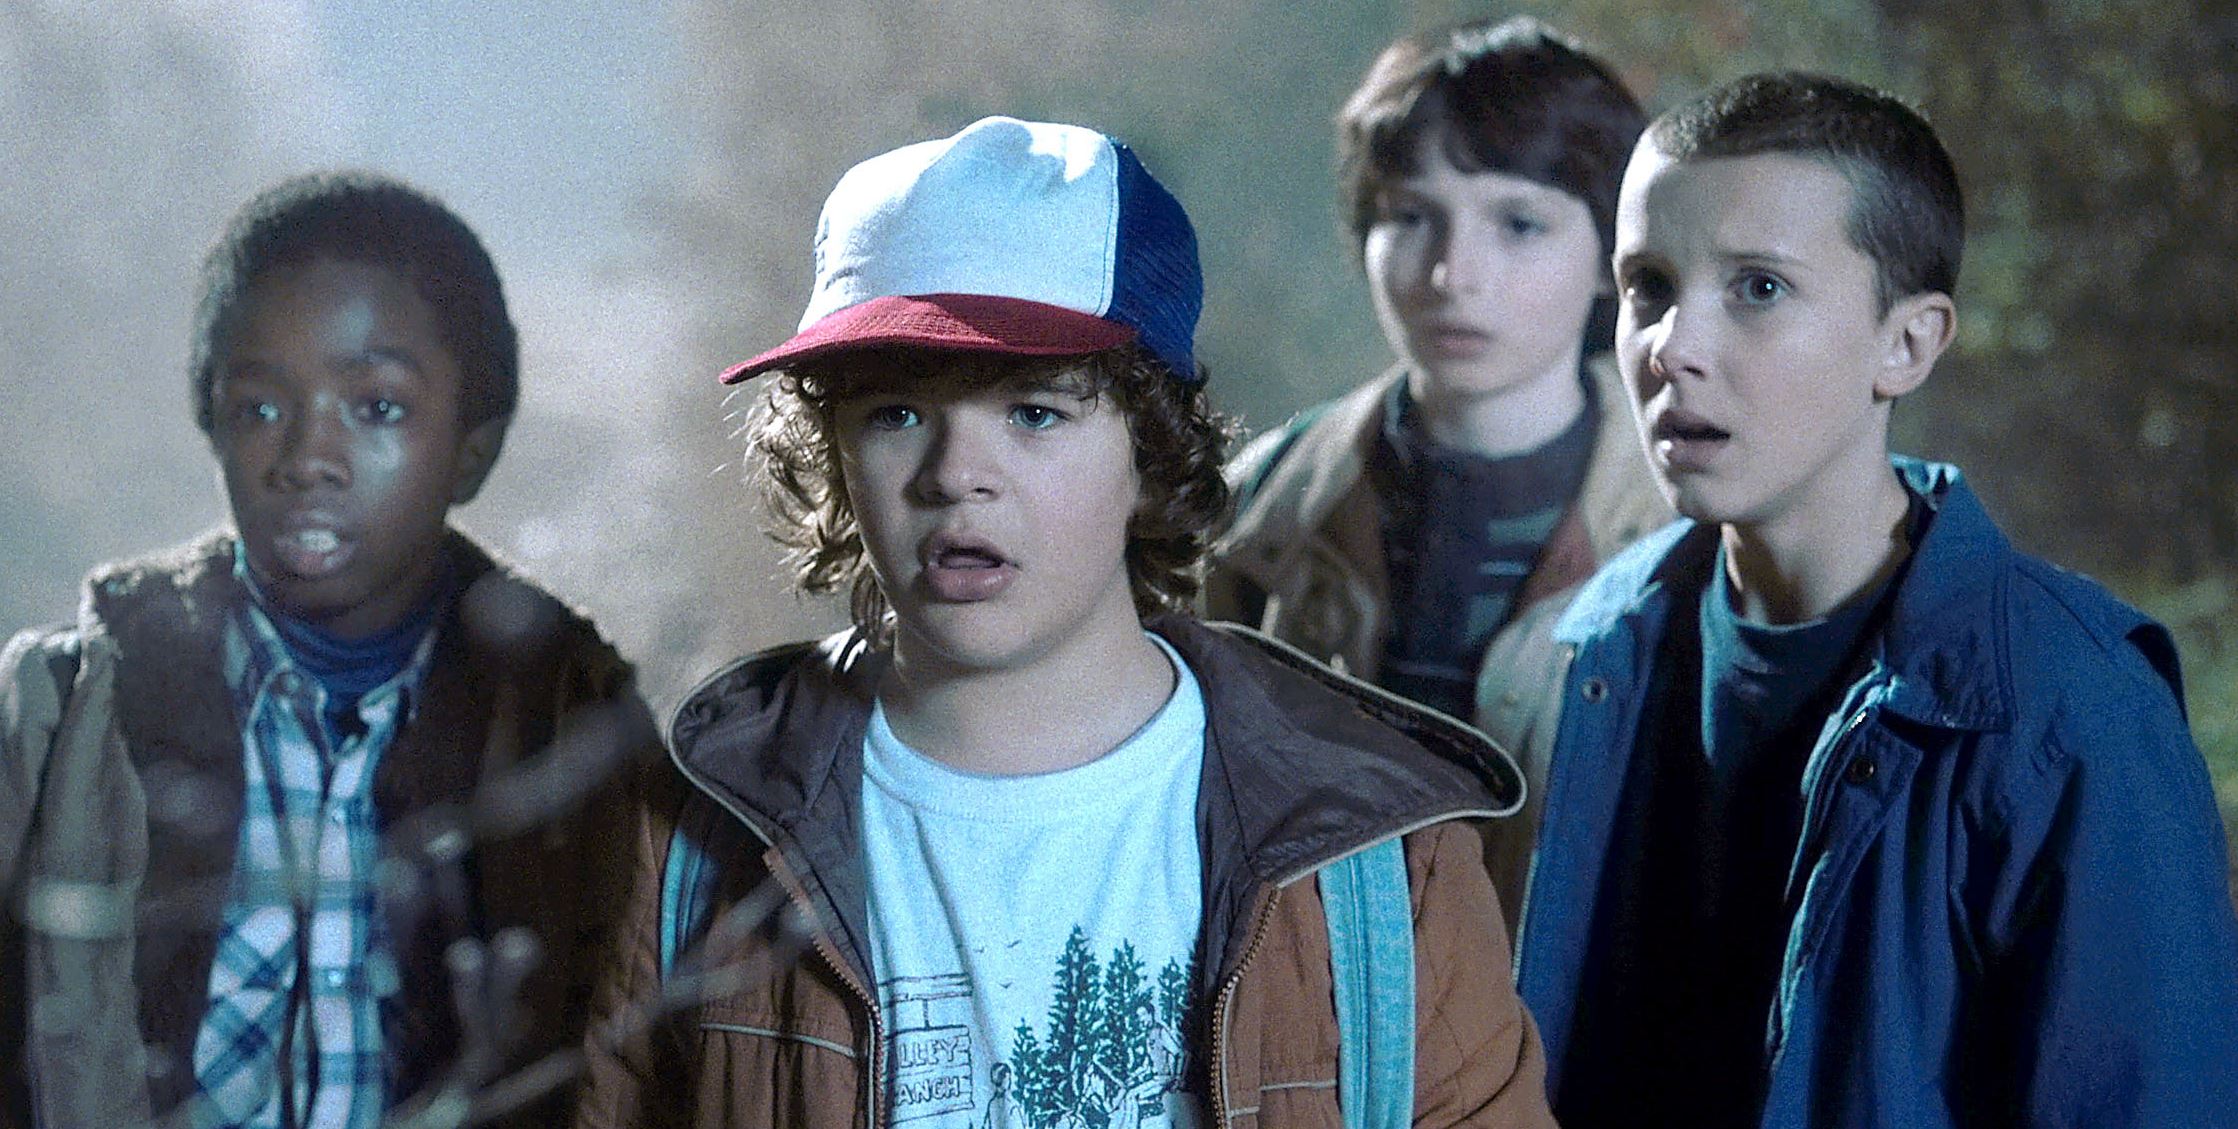 Netflix Announces 3rd Season of Stranger Things & Hints About The End of The Show